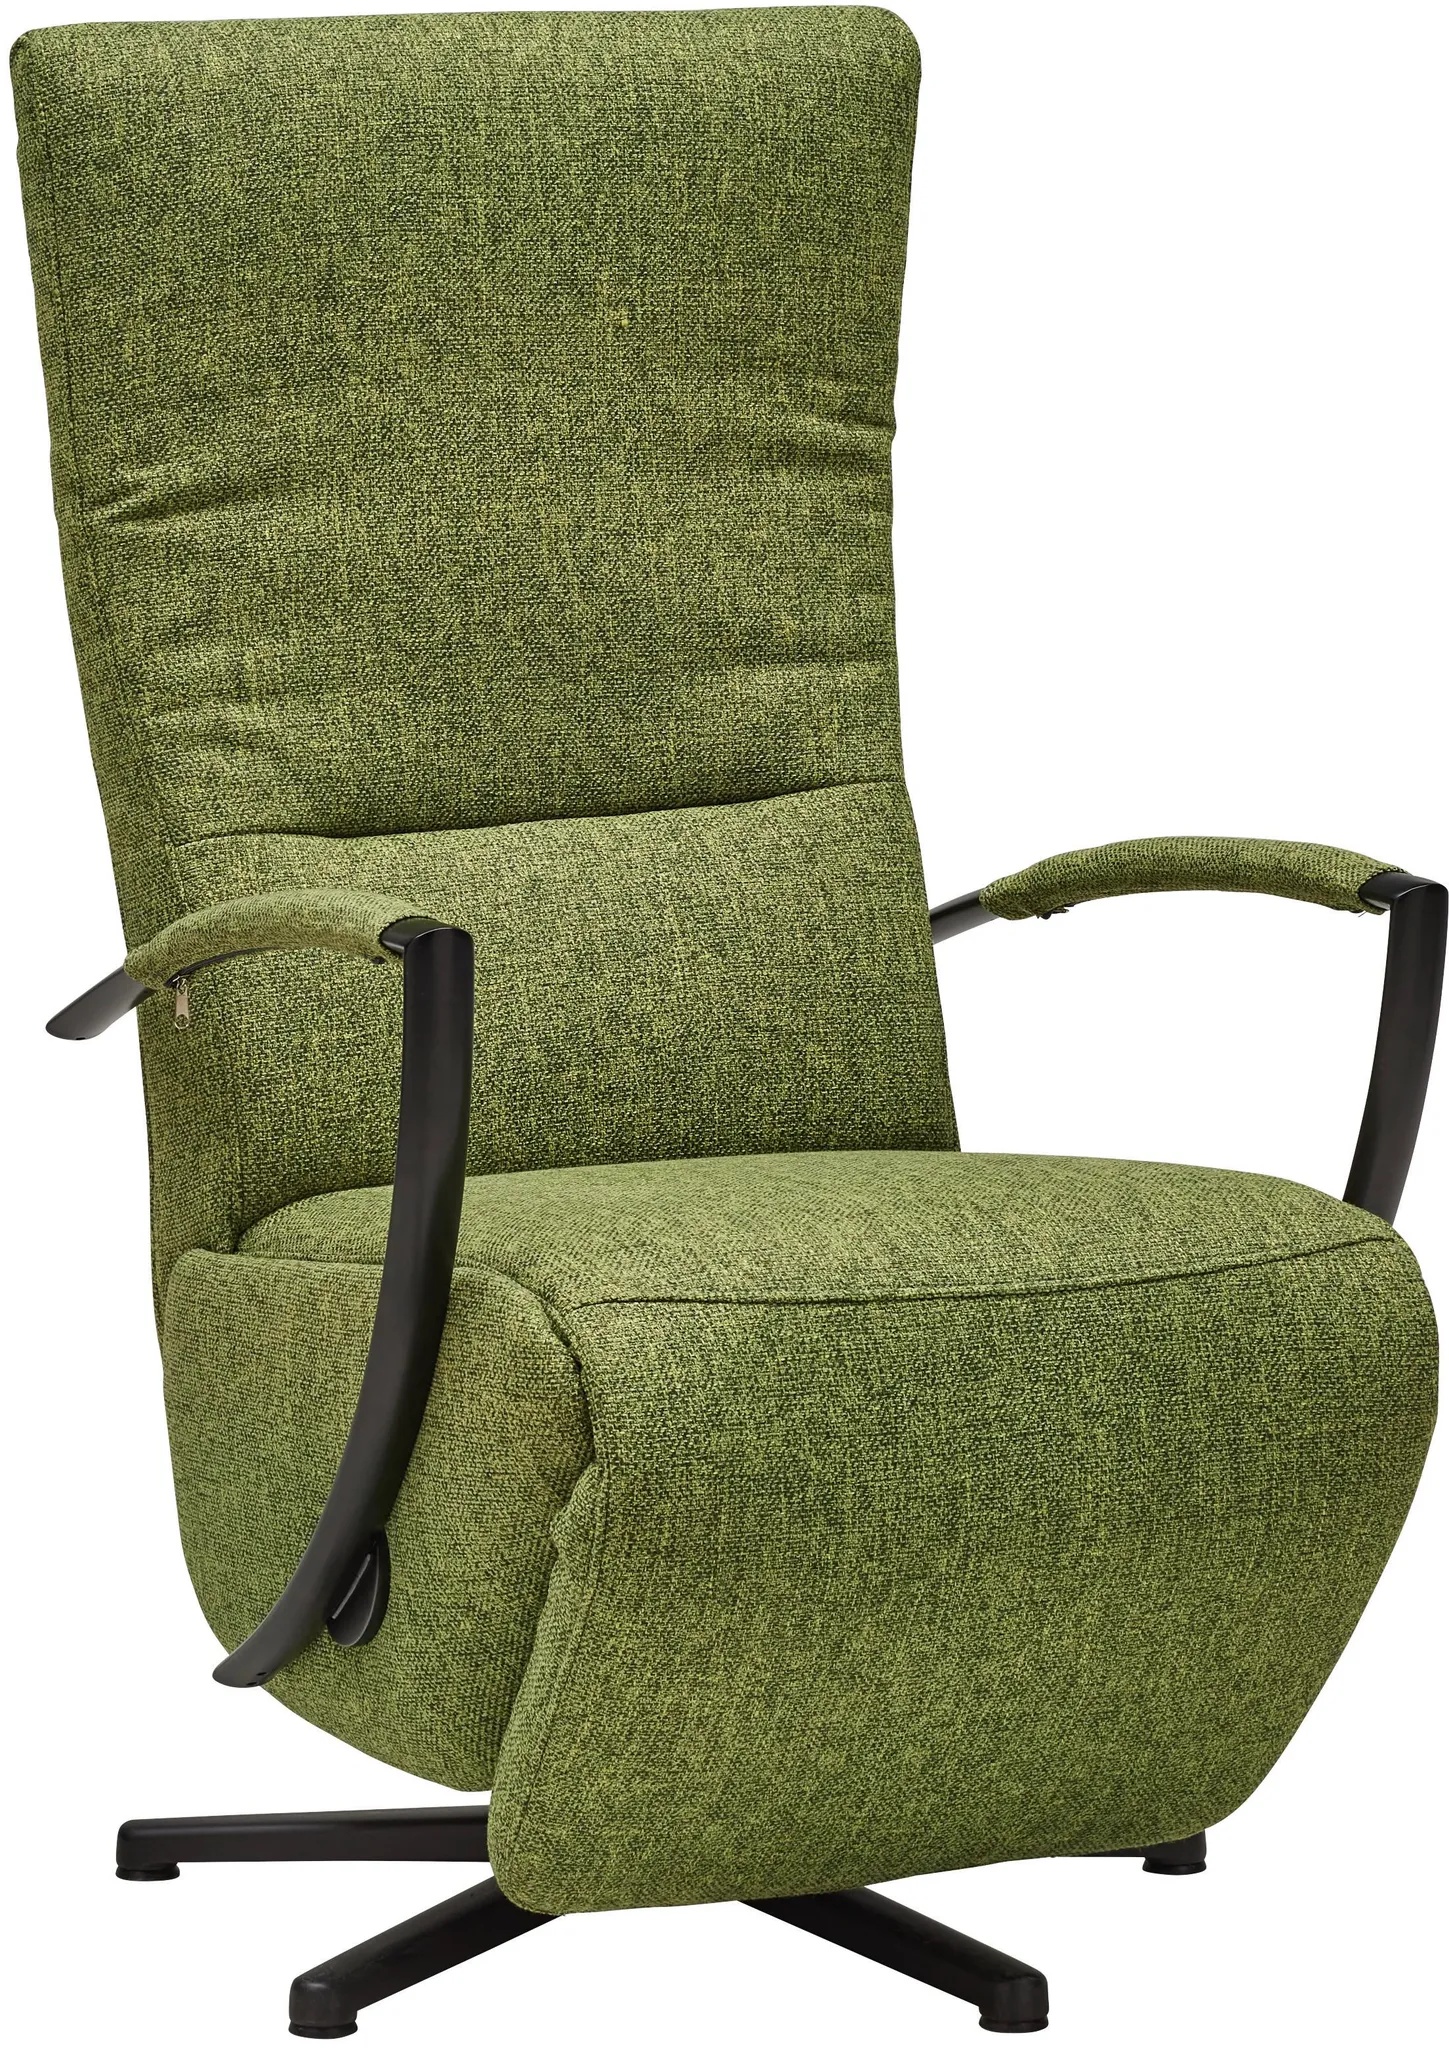 Relaxsessel Sitting 3 in Olive